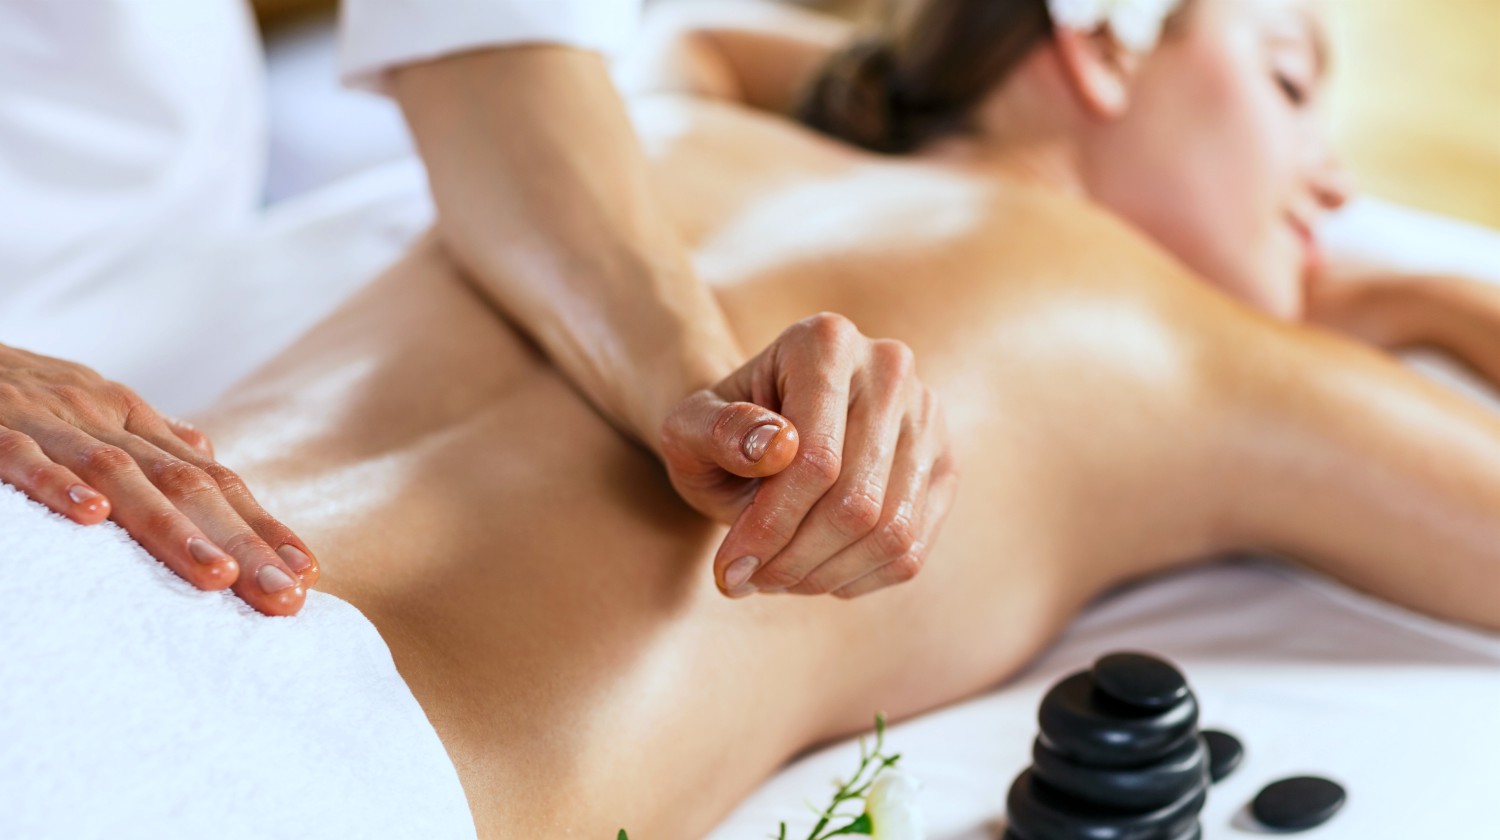 Best Relaxation Back Massage Techniques. How To Give A Relaxing